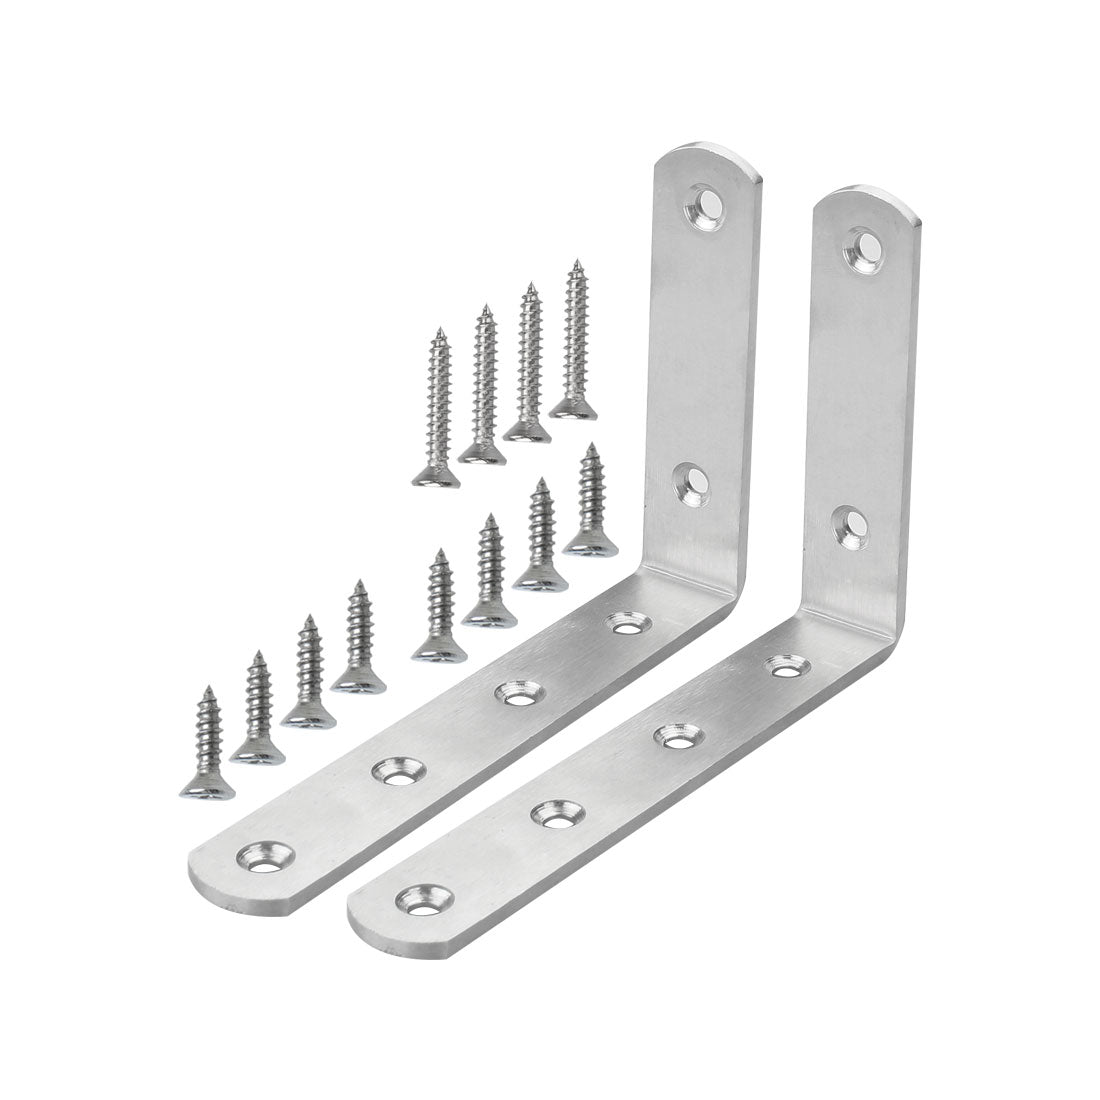 uxcell Uxcell Angle Brackets Stainless Steel Brace Fastener Support w Screws 150 x 100mm, 2pcs